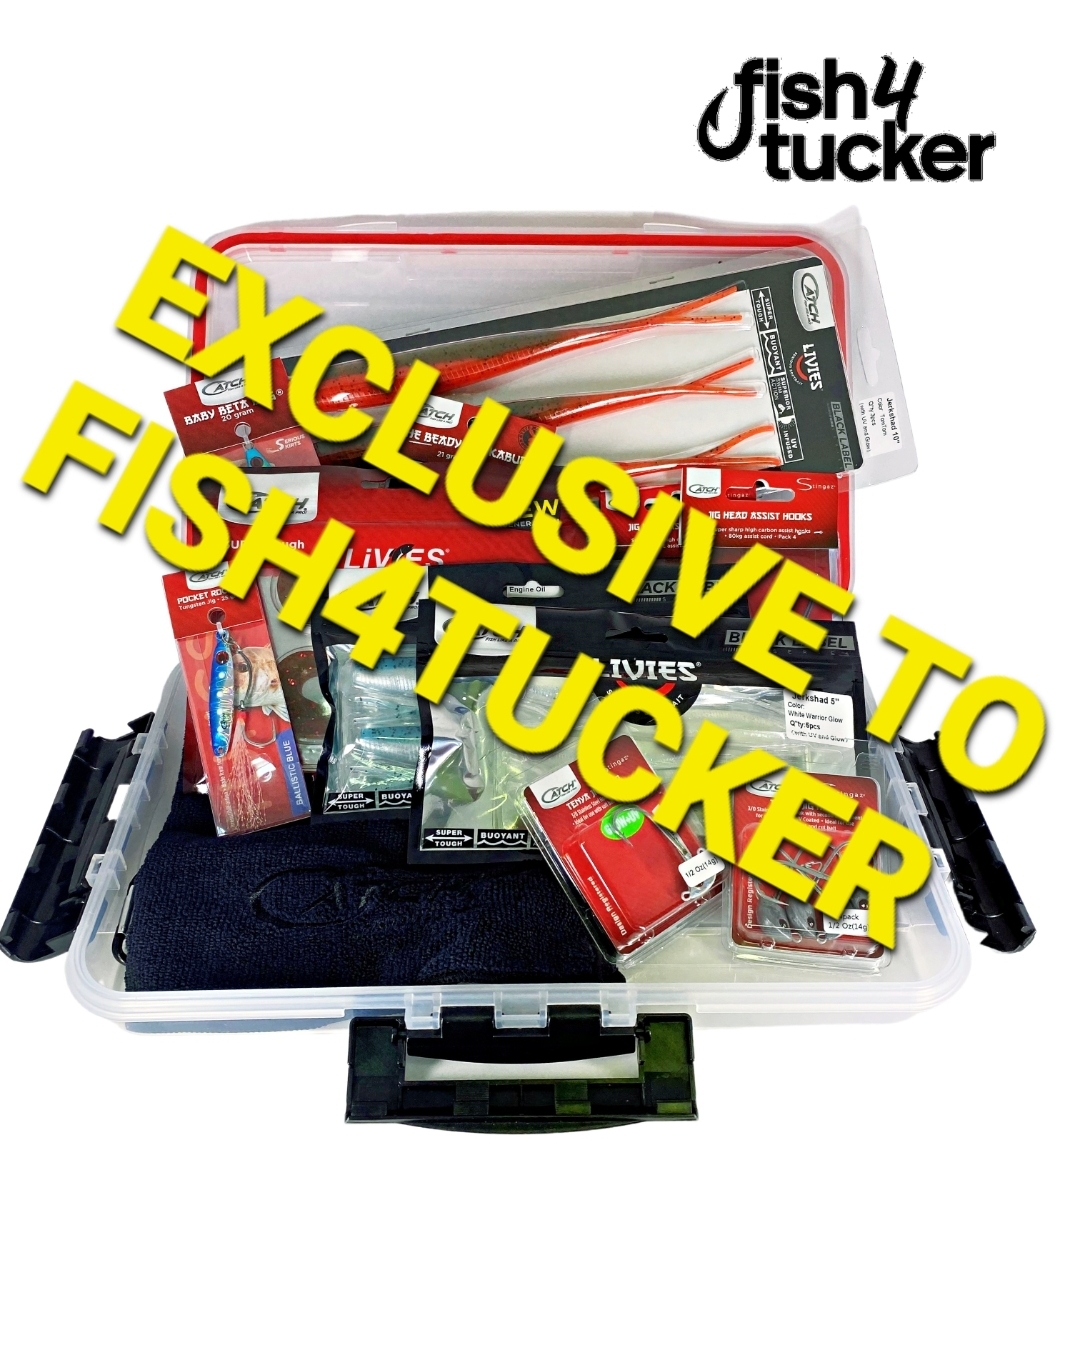 FISH4TUCKER BLACK LABEL VALUE PACK (nz only product) – Fish 4 Tucker